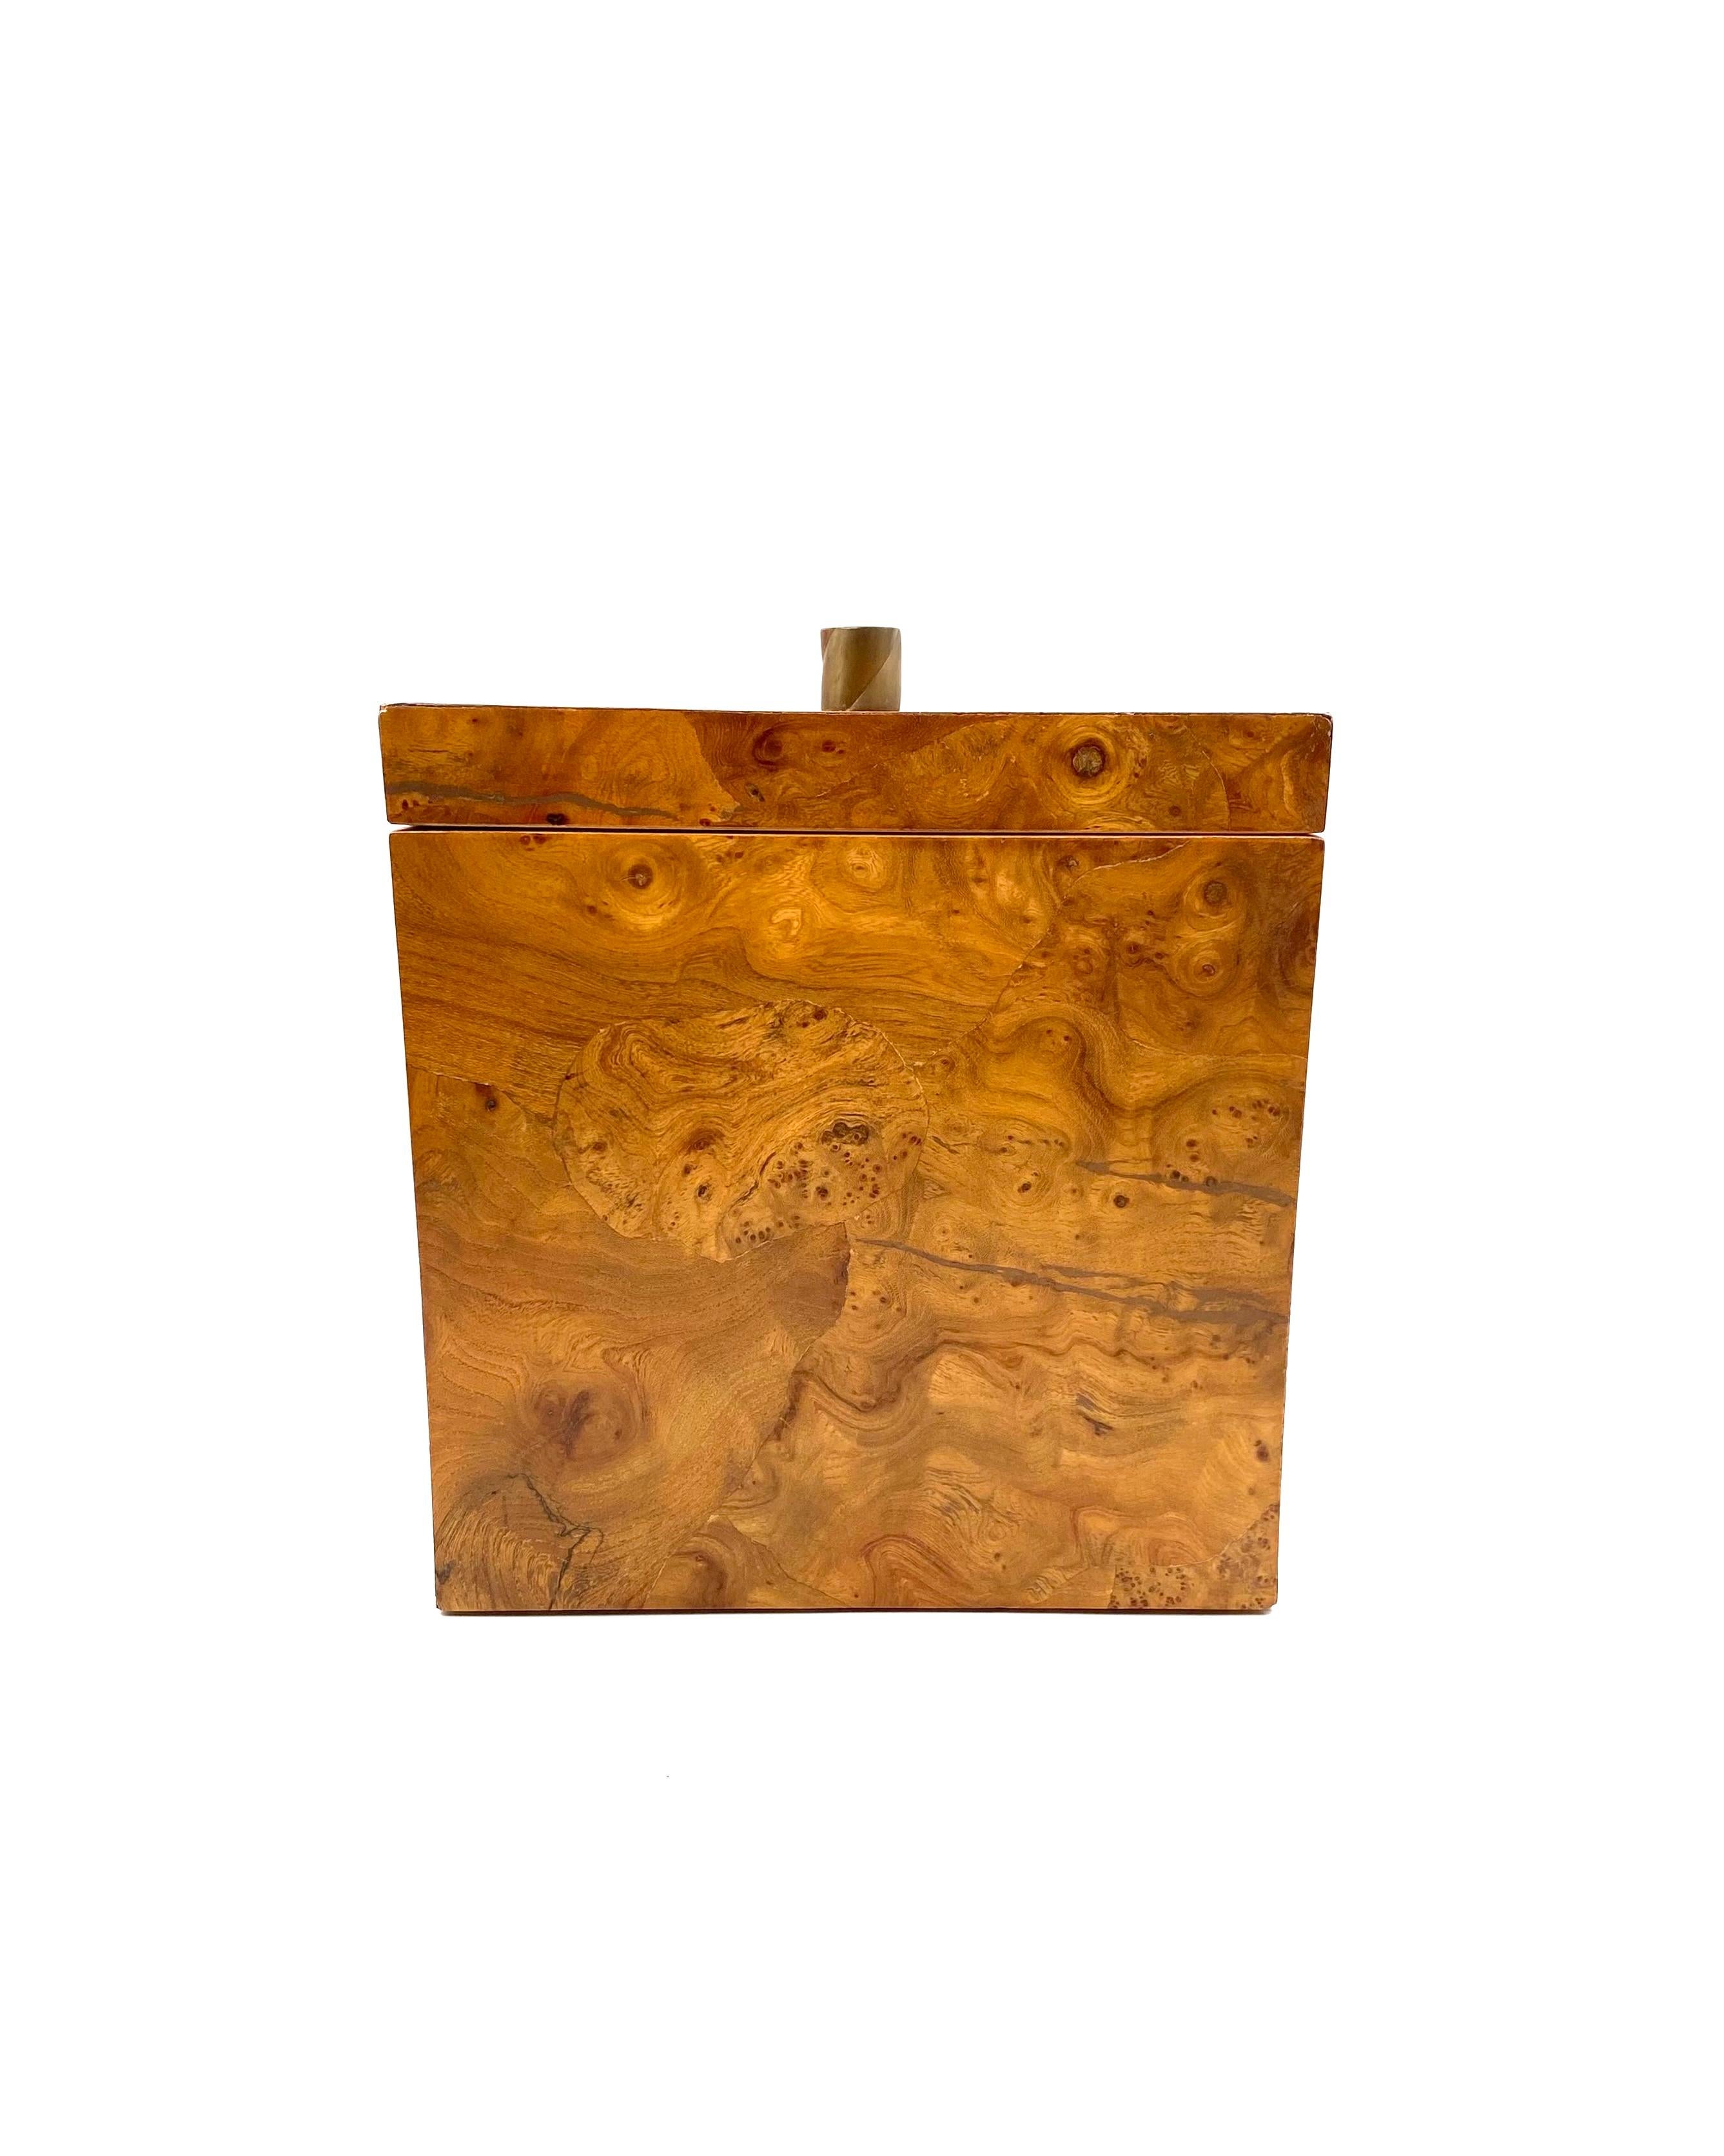 Hollywood regency burl wood and metal ice bucket

Italy 1970s

H 30 cm

24 x 24 cm

Conditions: very good consistent with age and use.